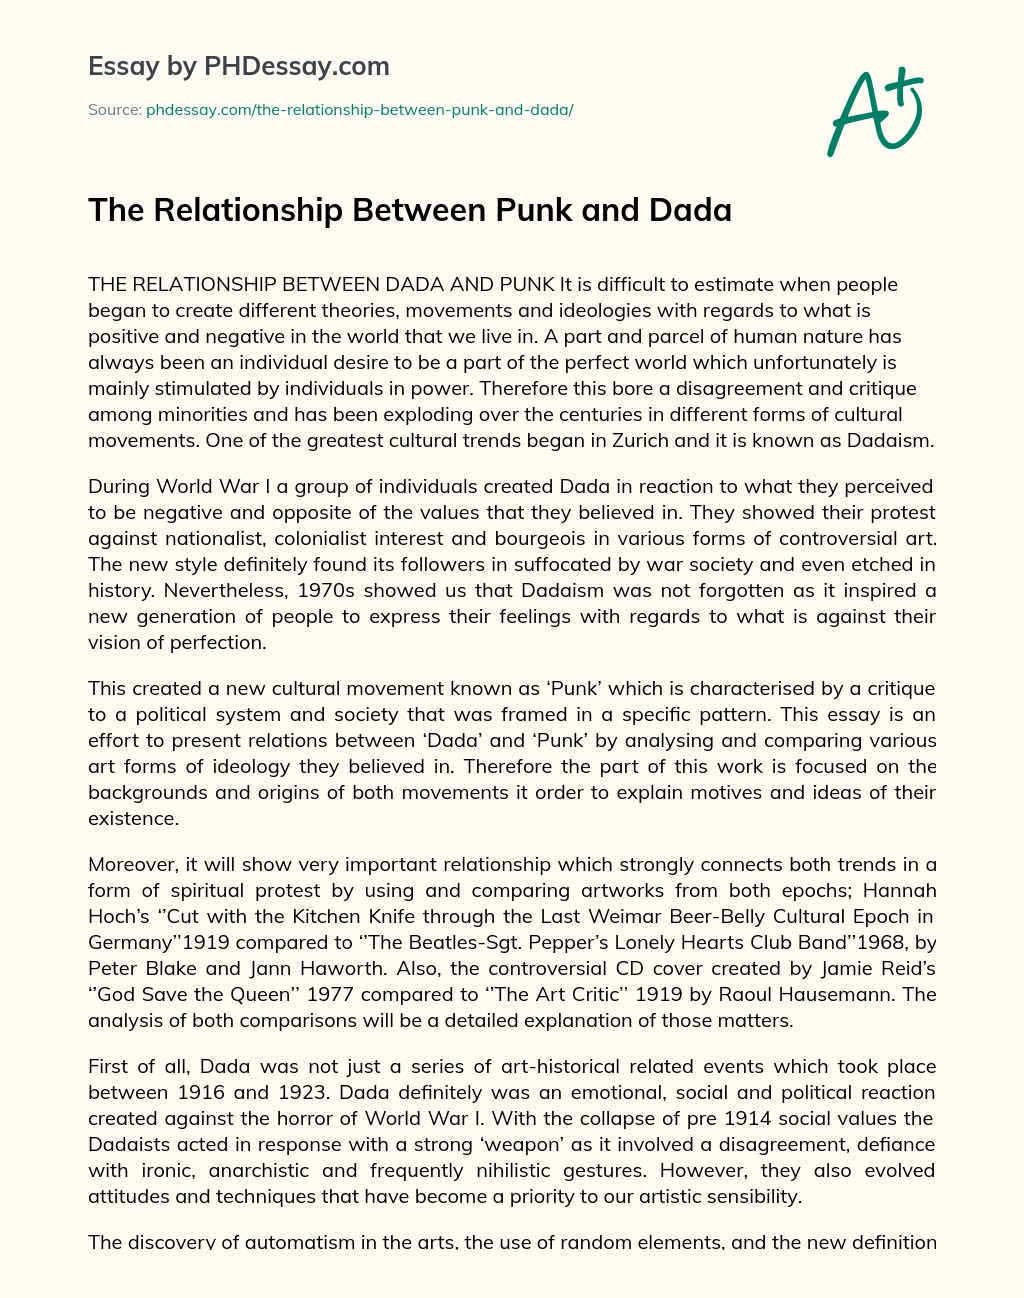 The Relationship Between Punk and Dada essay